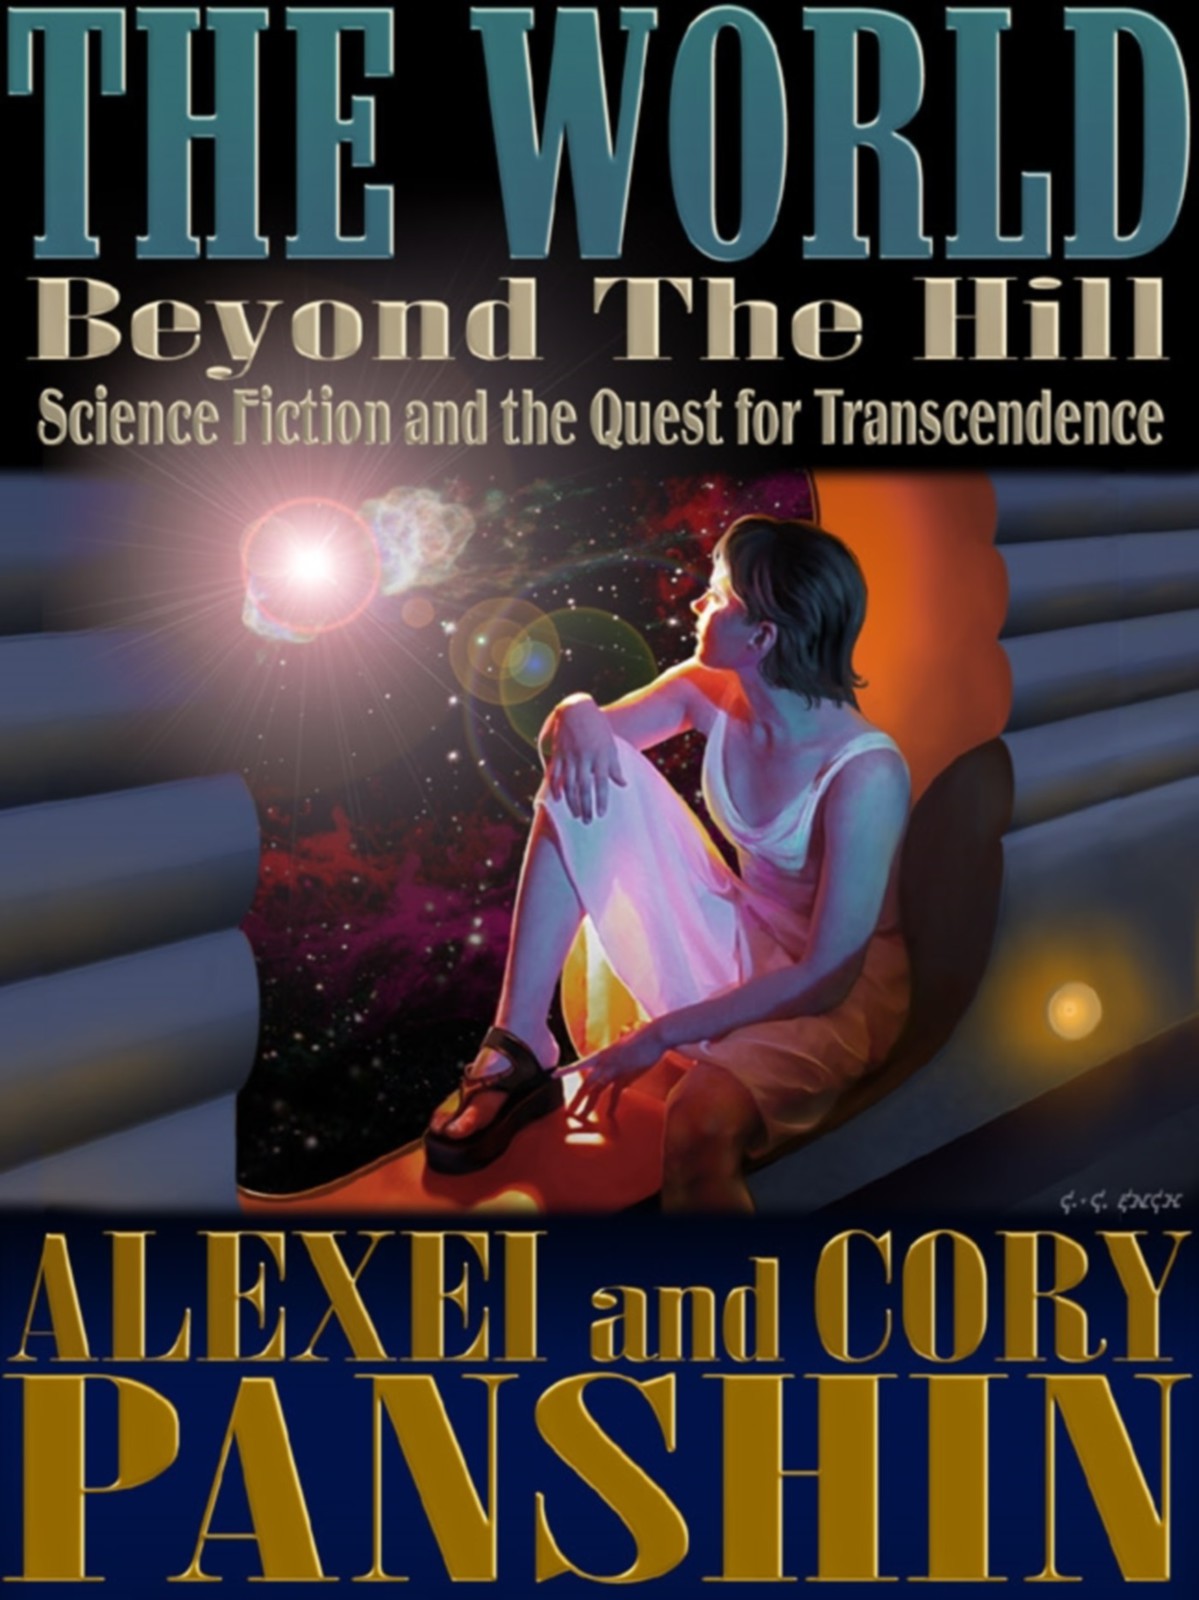 The World Beyond the Hill: Science Fiction and the Quest for Transcendence by Alexei Panshin